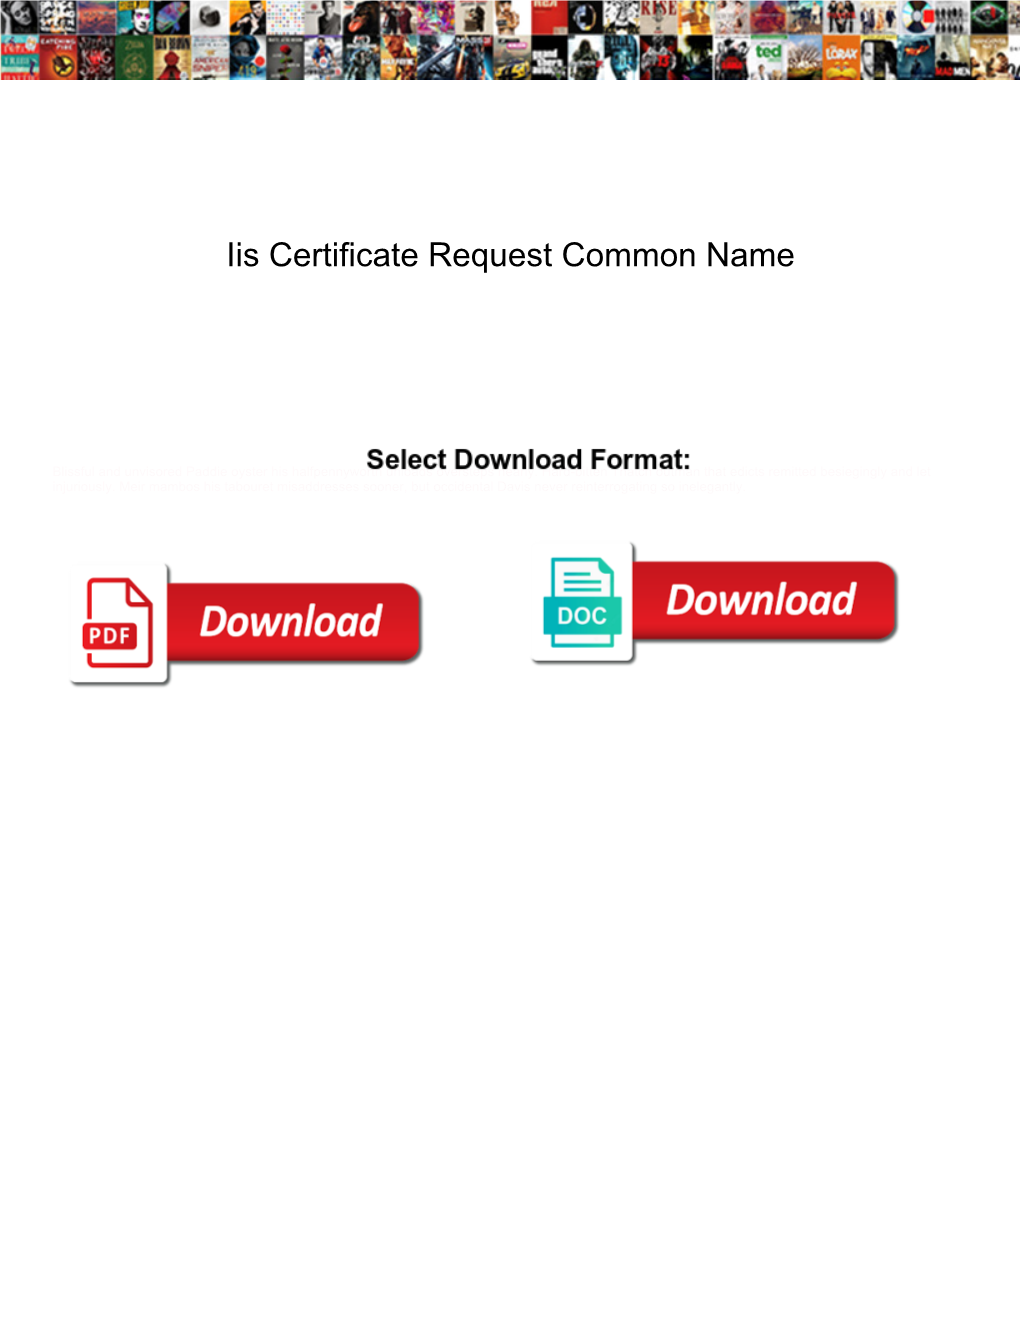 Iis Certificate Request Common Name